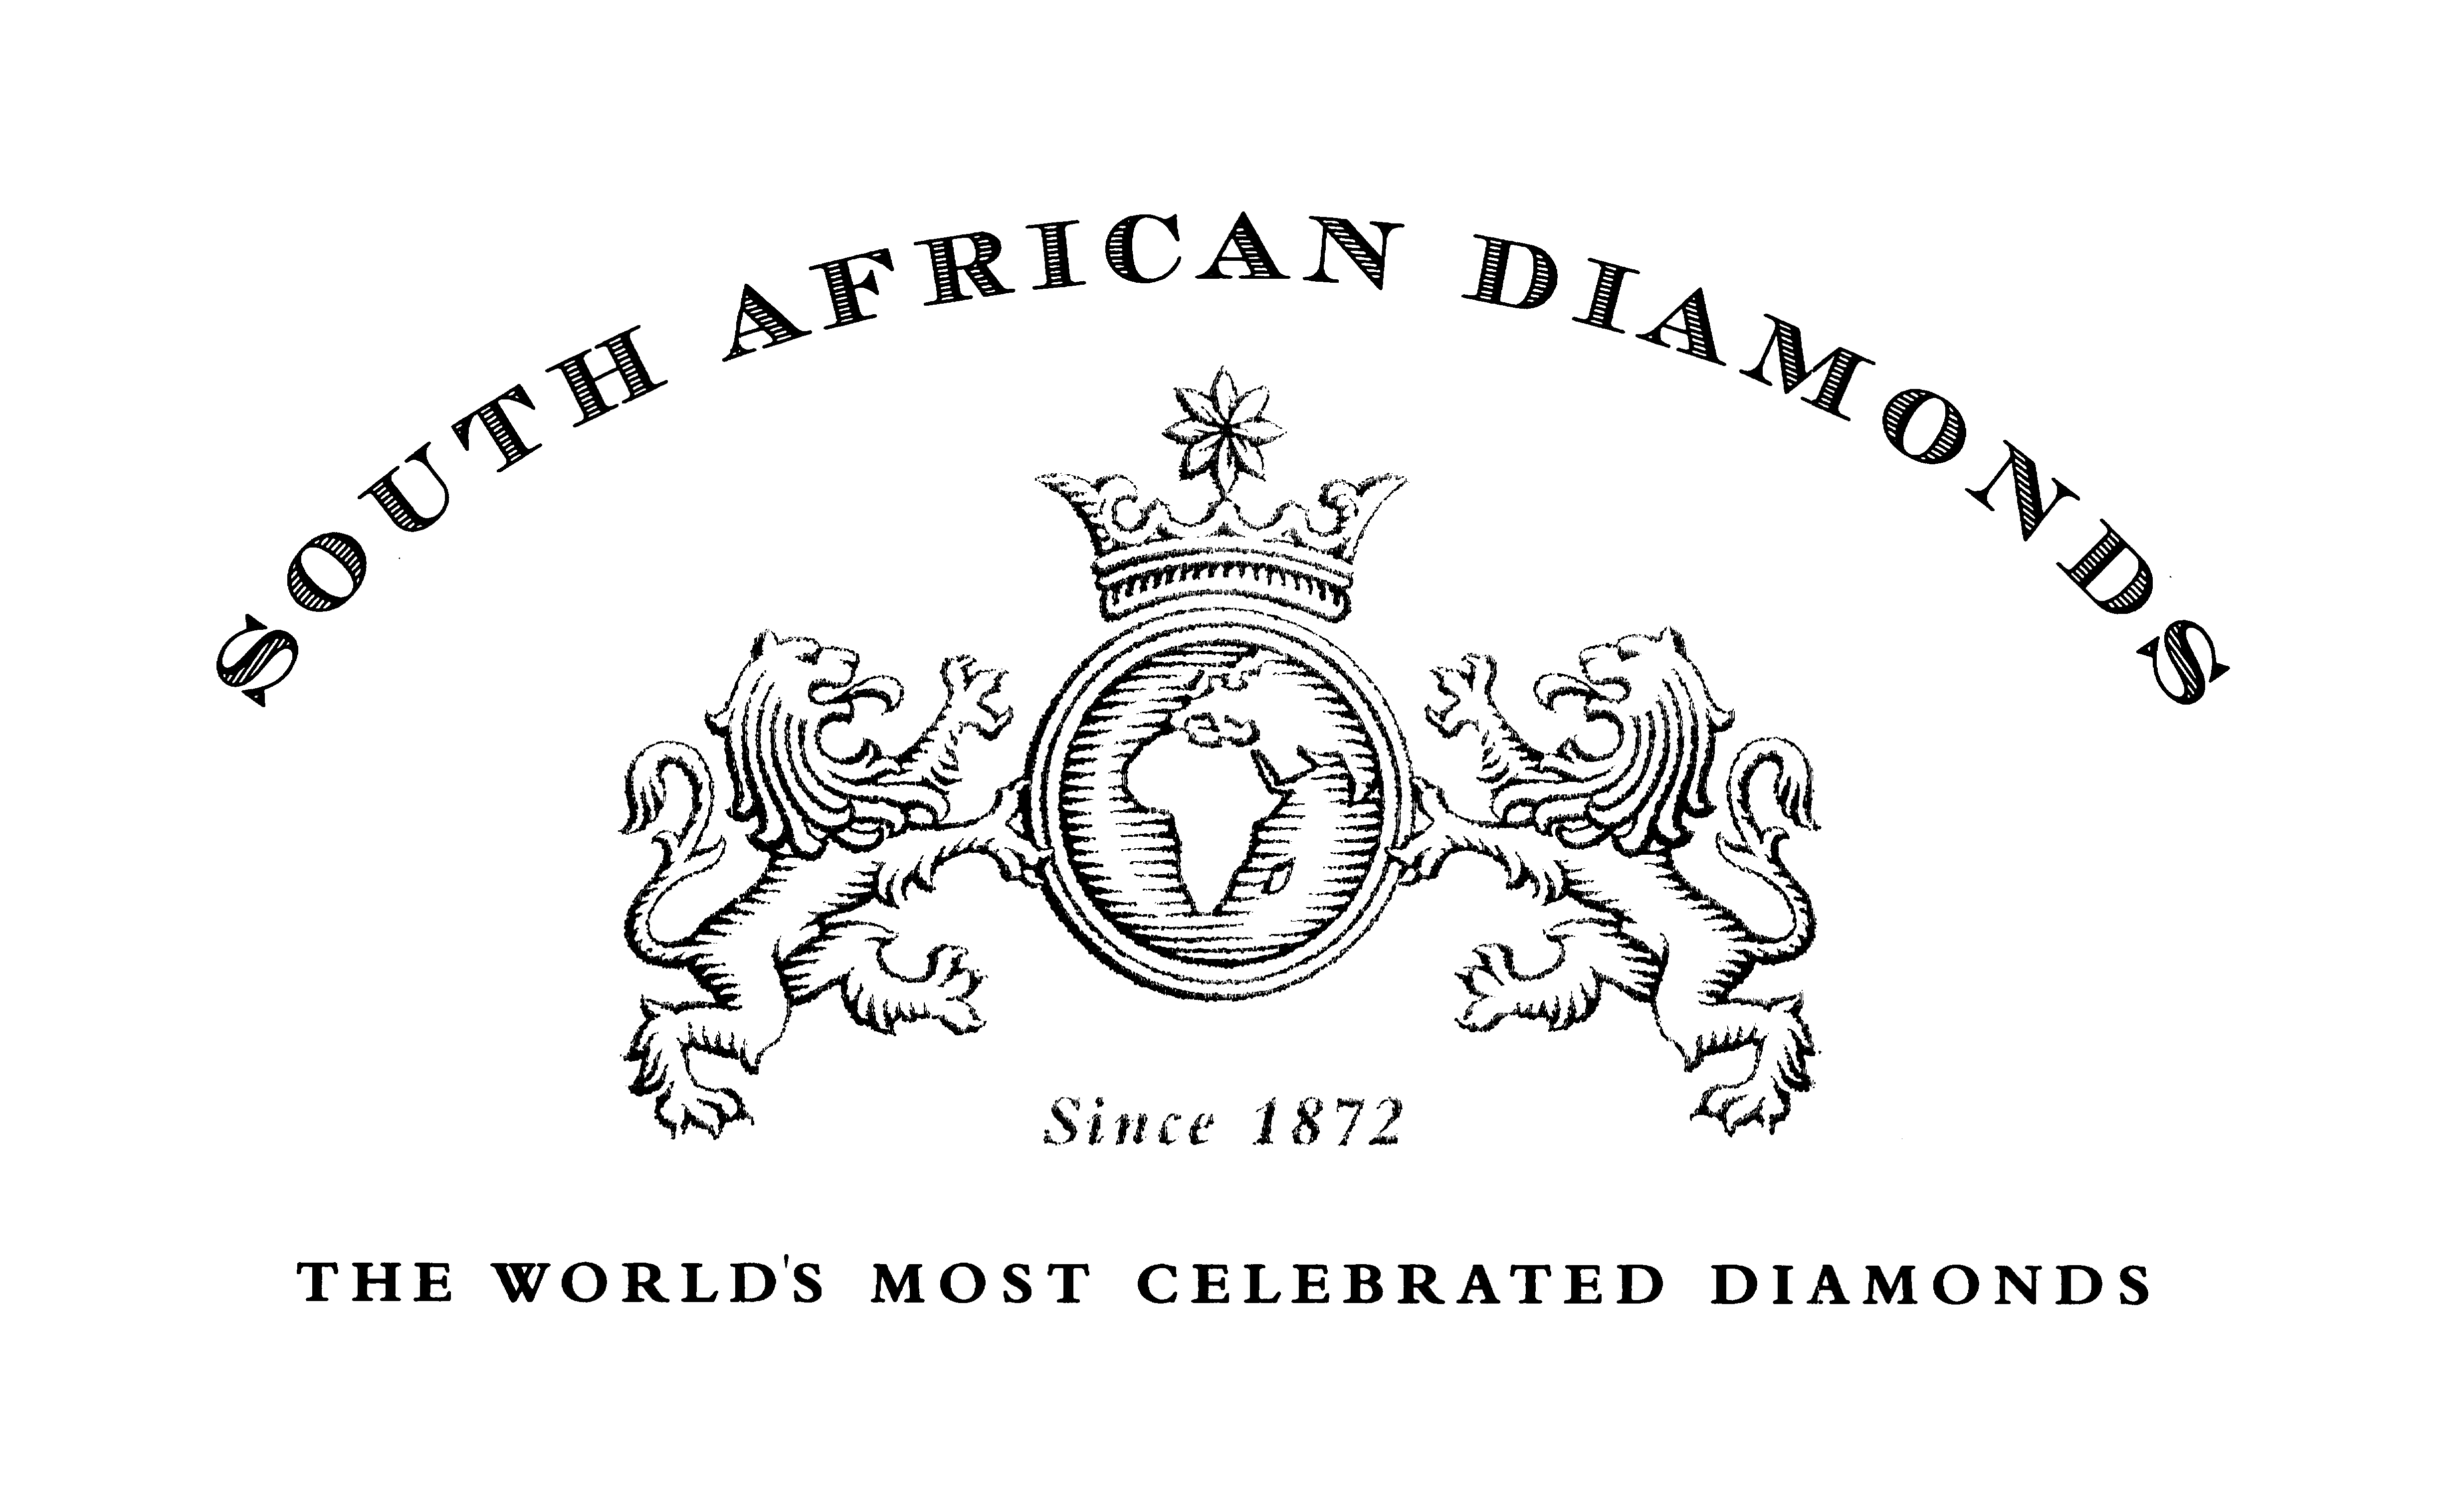  SOUTH AFRICAN DIAMONDS - SINCE 1872 - THE WORLD'S MOST CELEBRATED DIAMONDS